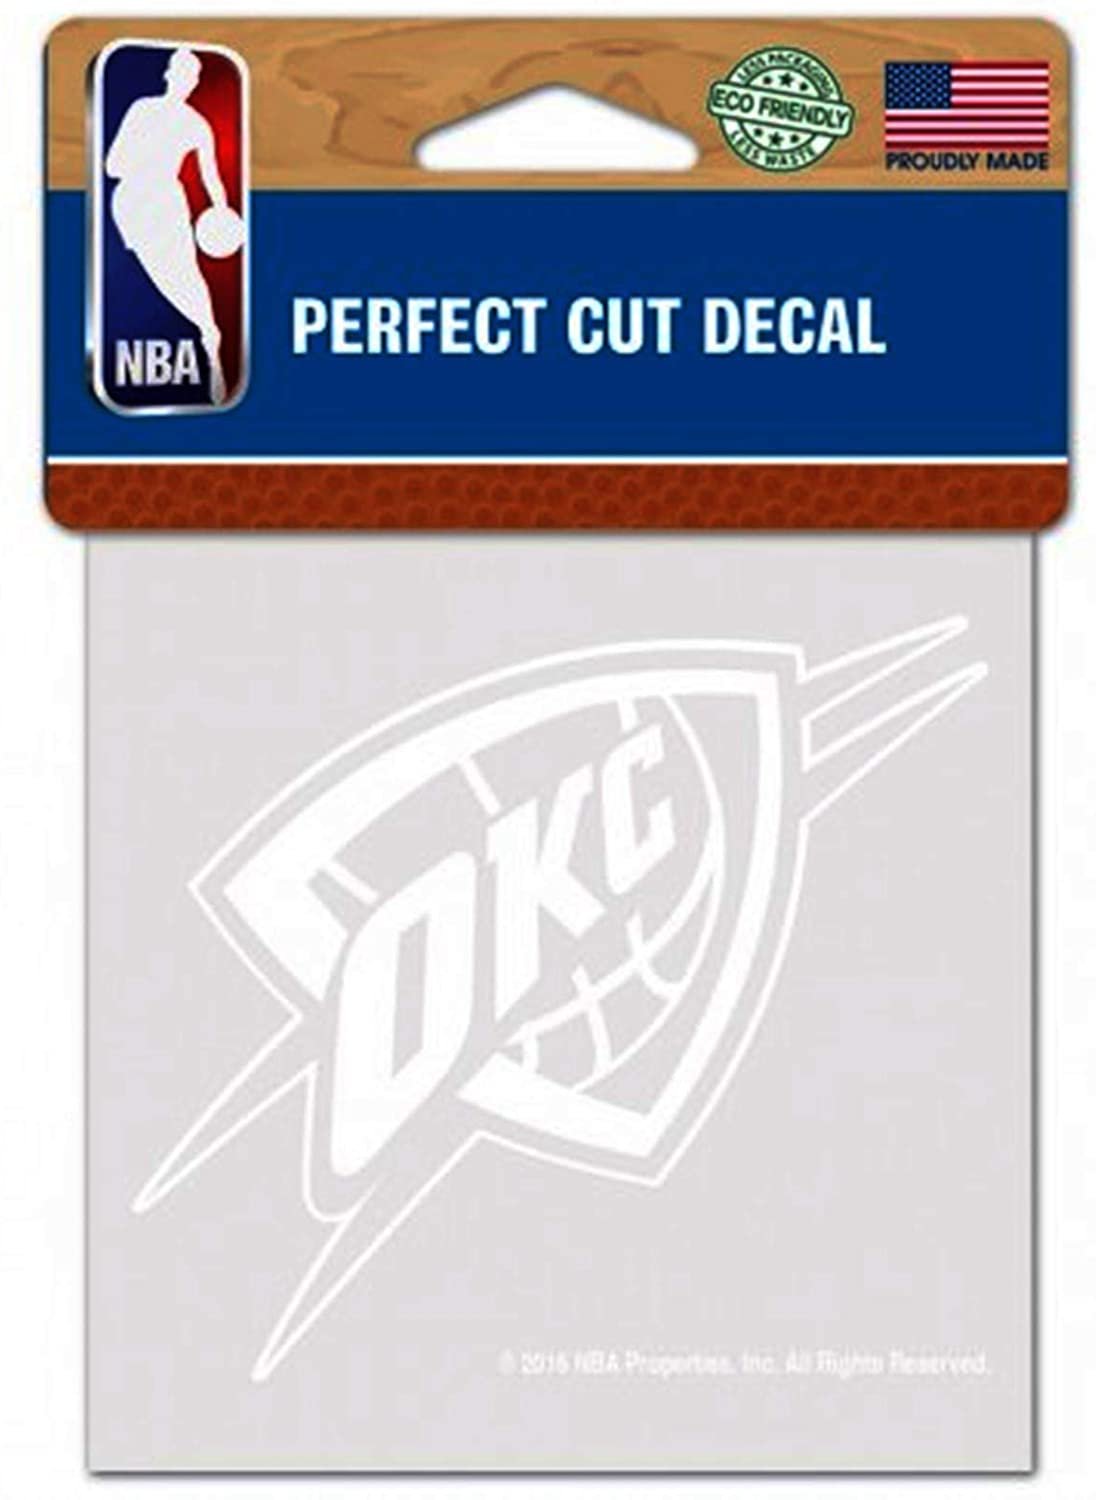 Oklahoma City Thunder 4x4 Inch Die Cut Decal Sticker, White Logo, Clear Backing